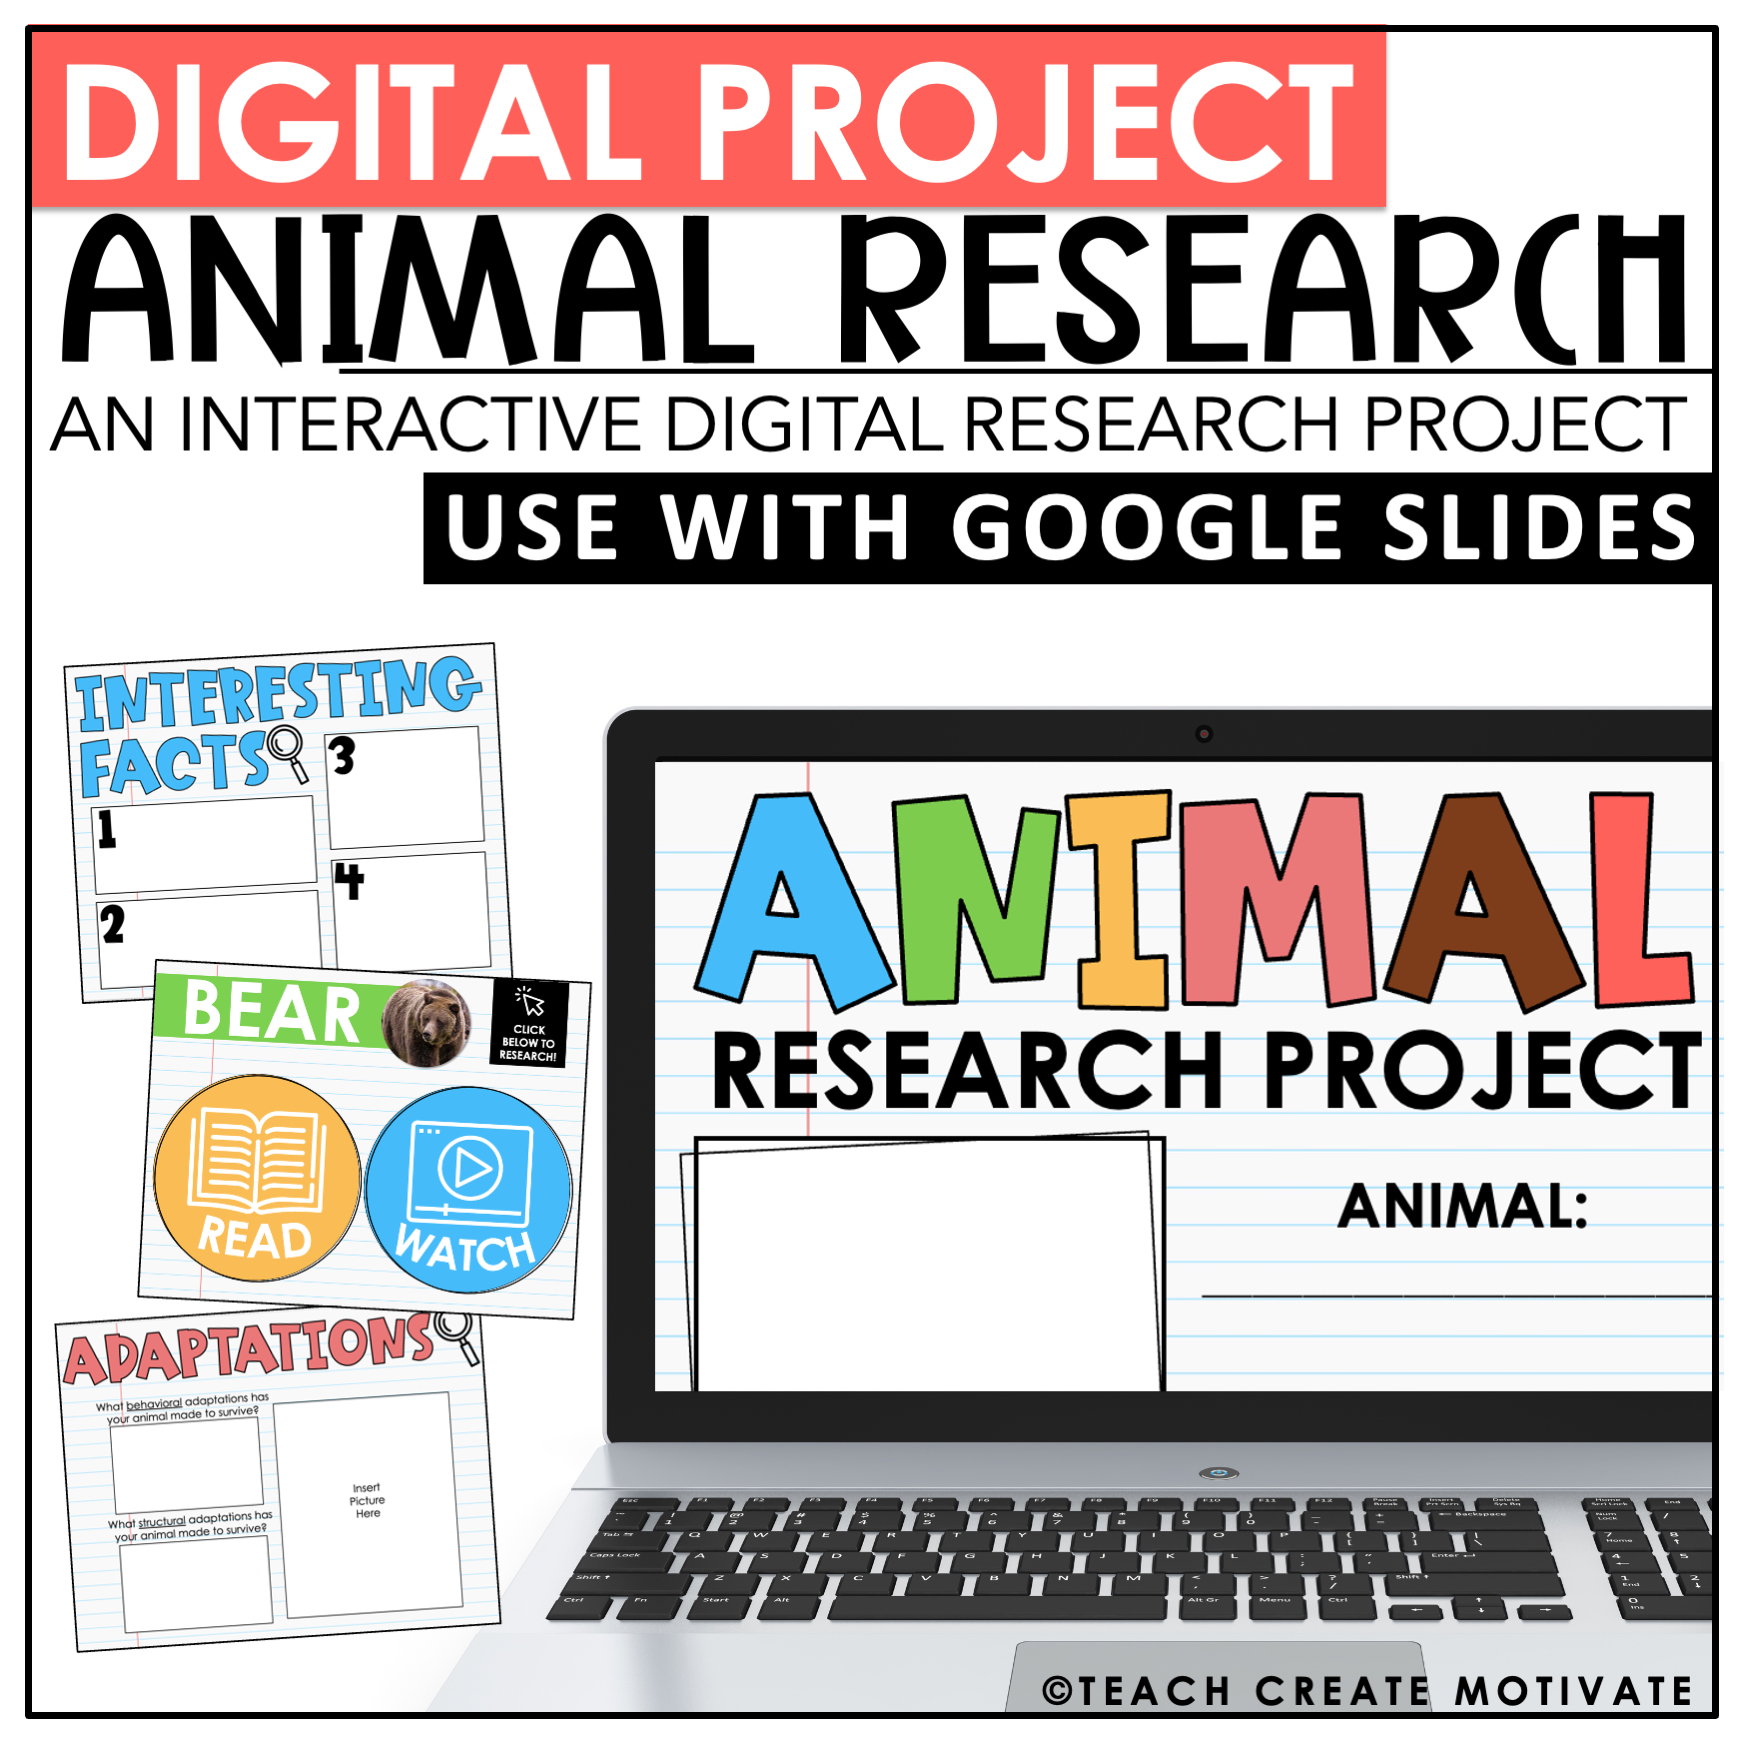 my animal research project